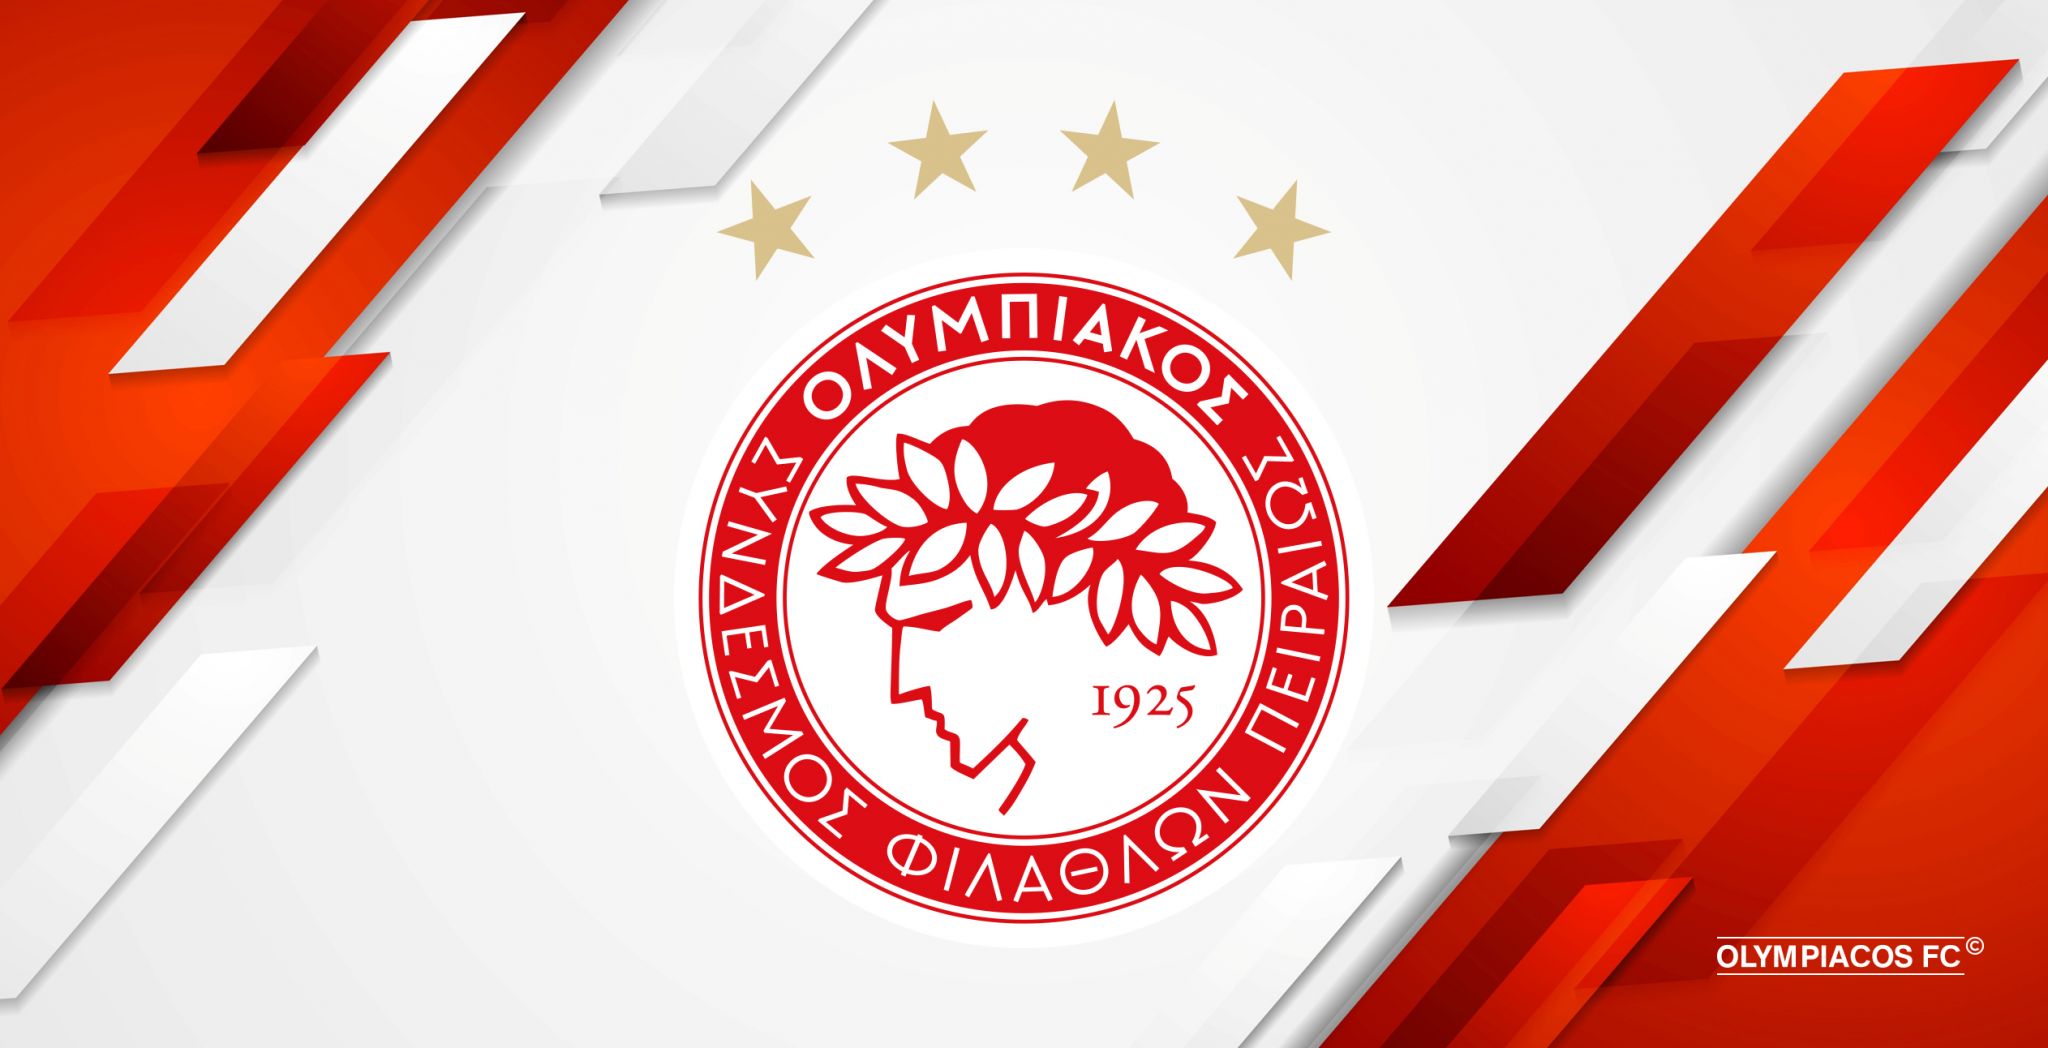 Olympiacos Fc Announcement Olympiakos Olympiacos Org